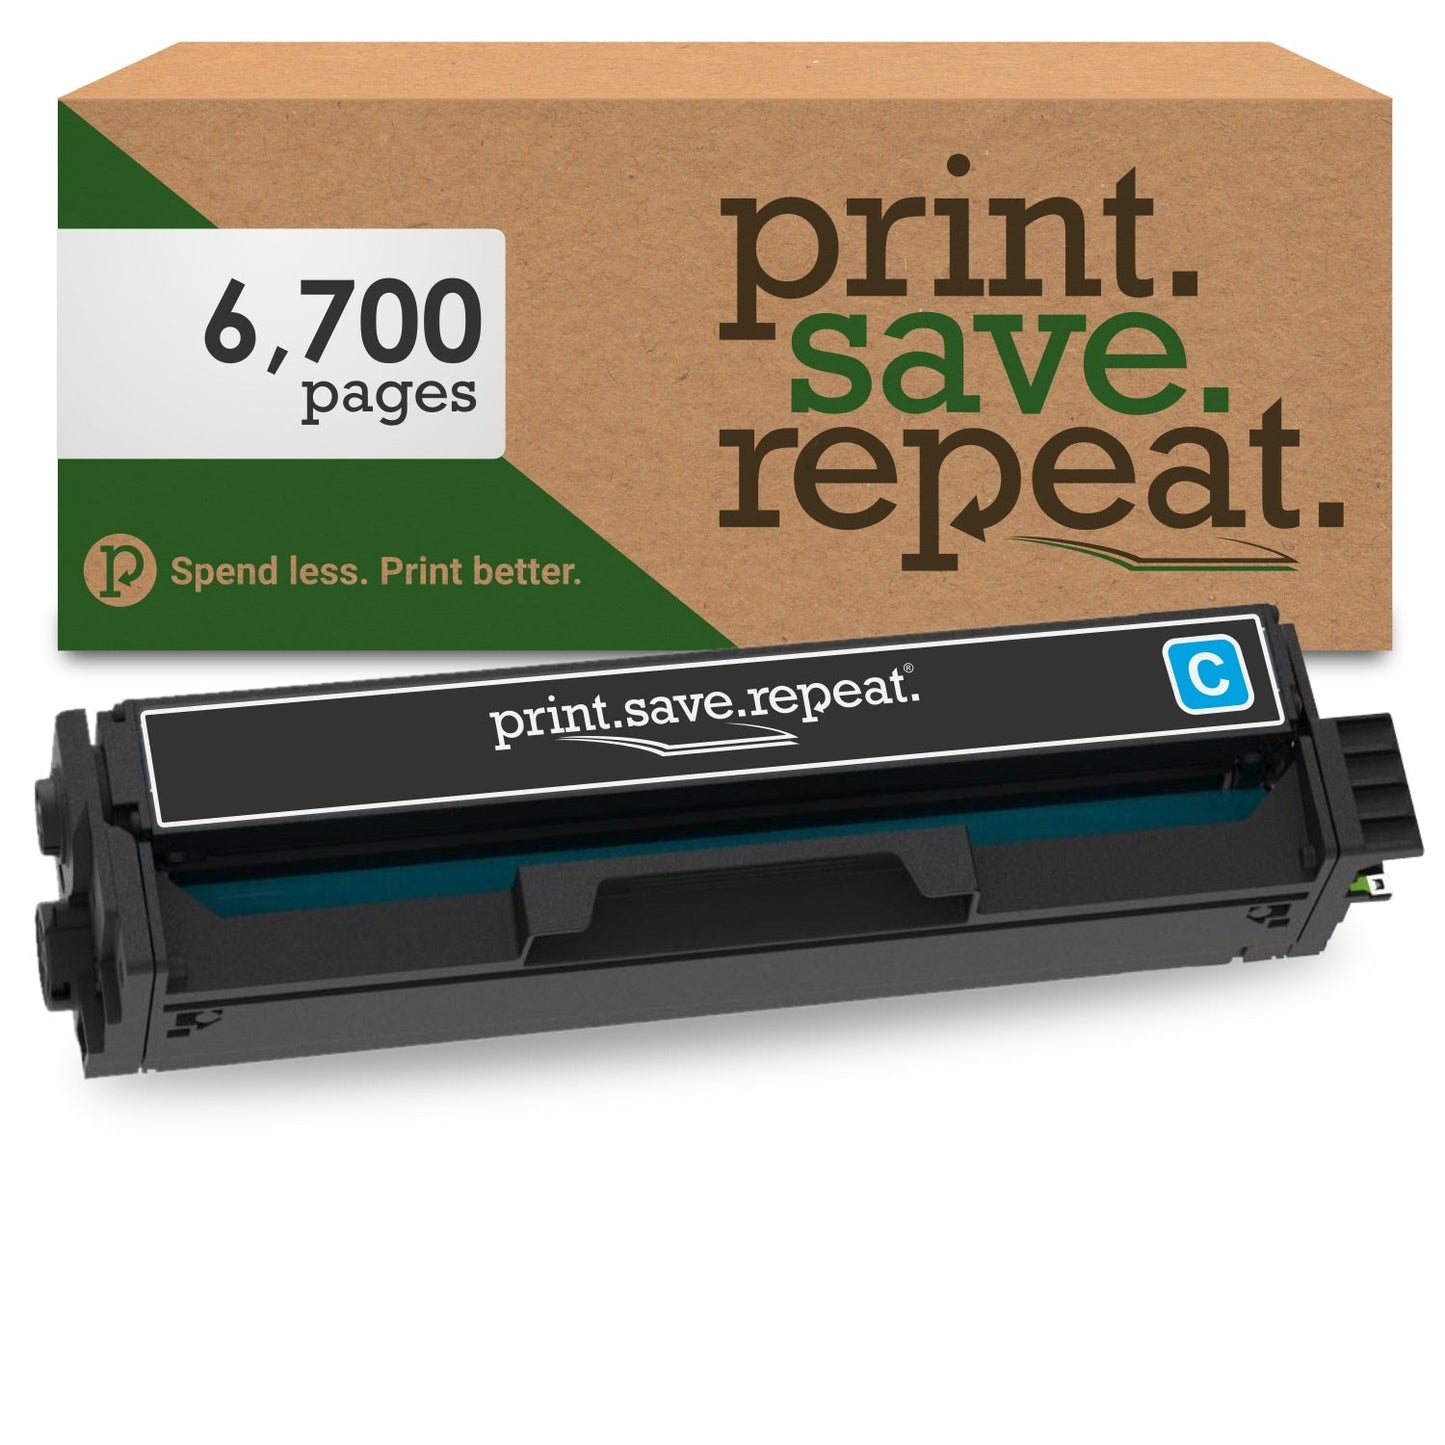 Print.Save.Repeat. Lexmark 20N1XC0 Cyan Extra High Yield Remanufactured Toner Cartridge for CS431, CX431 [6,700 Pages]